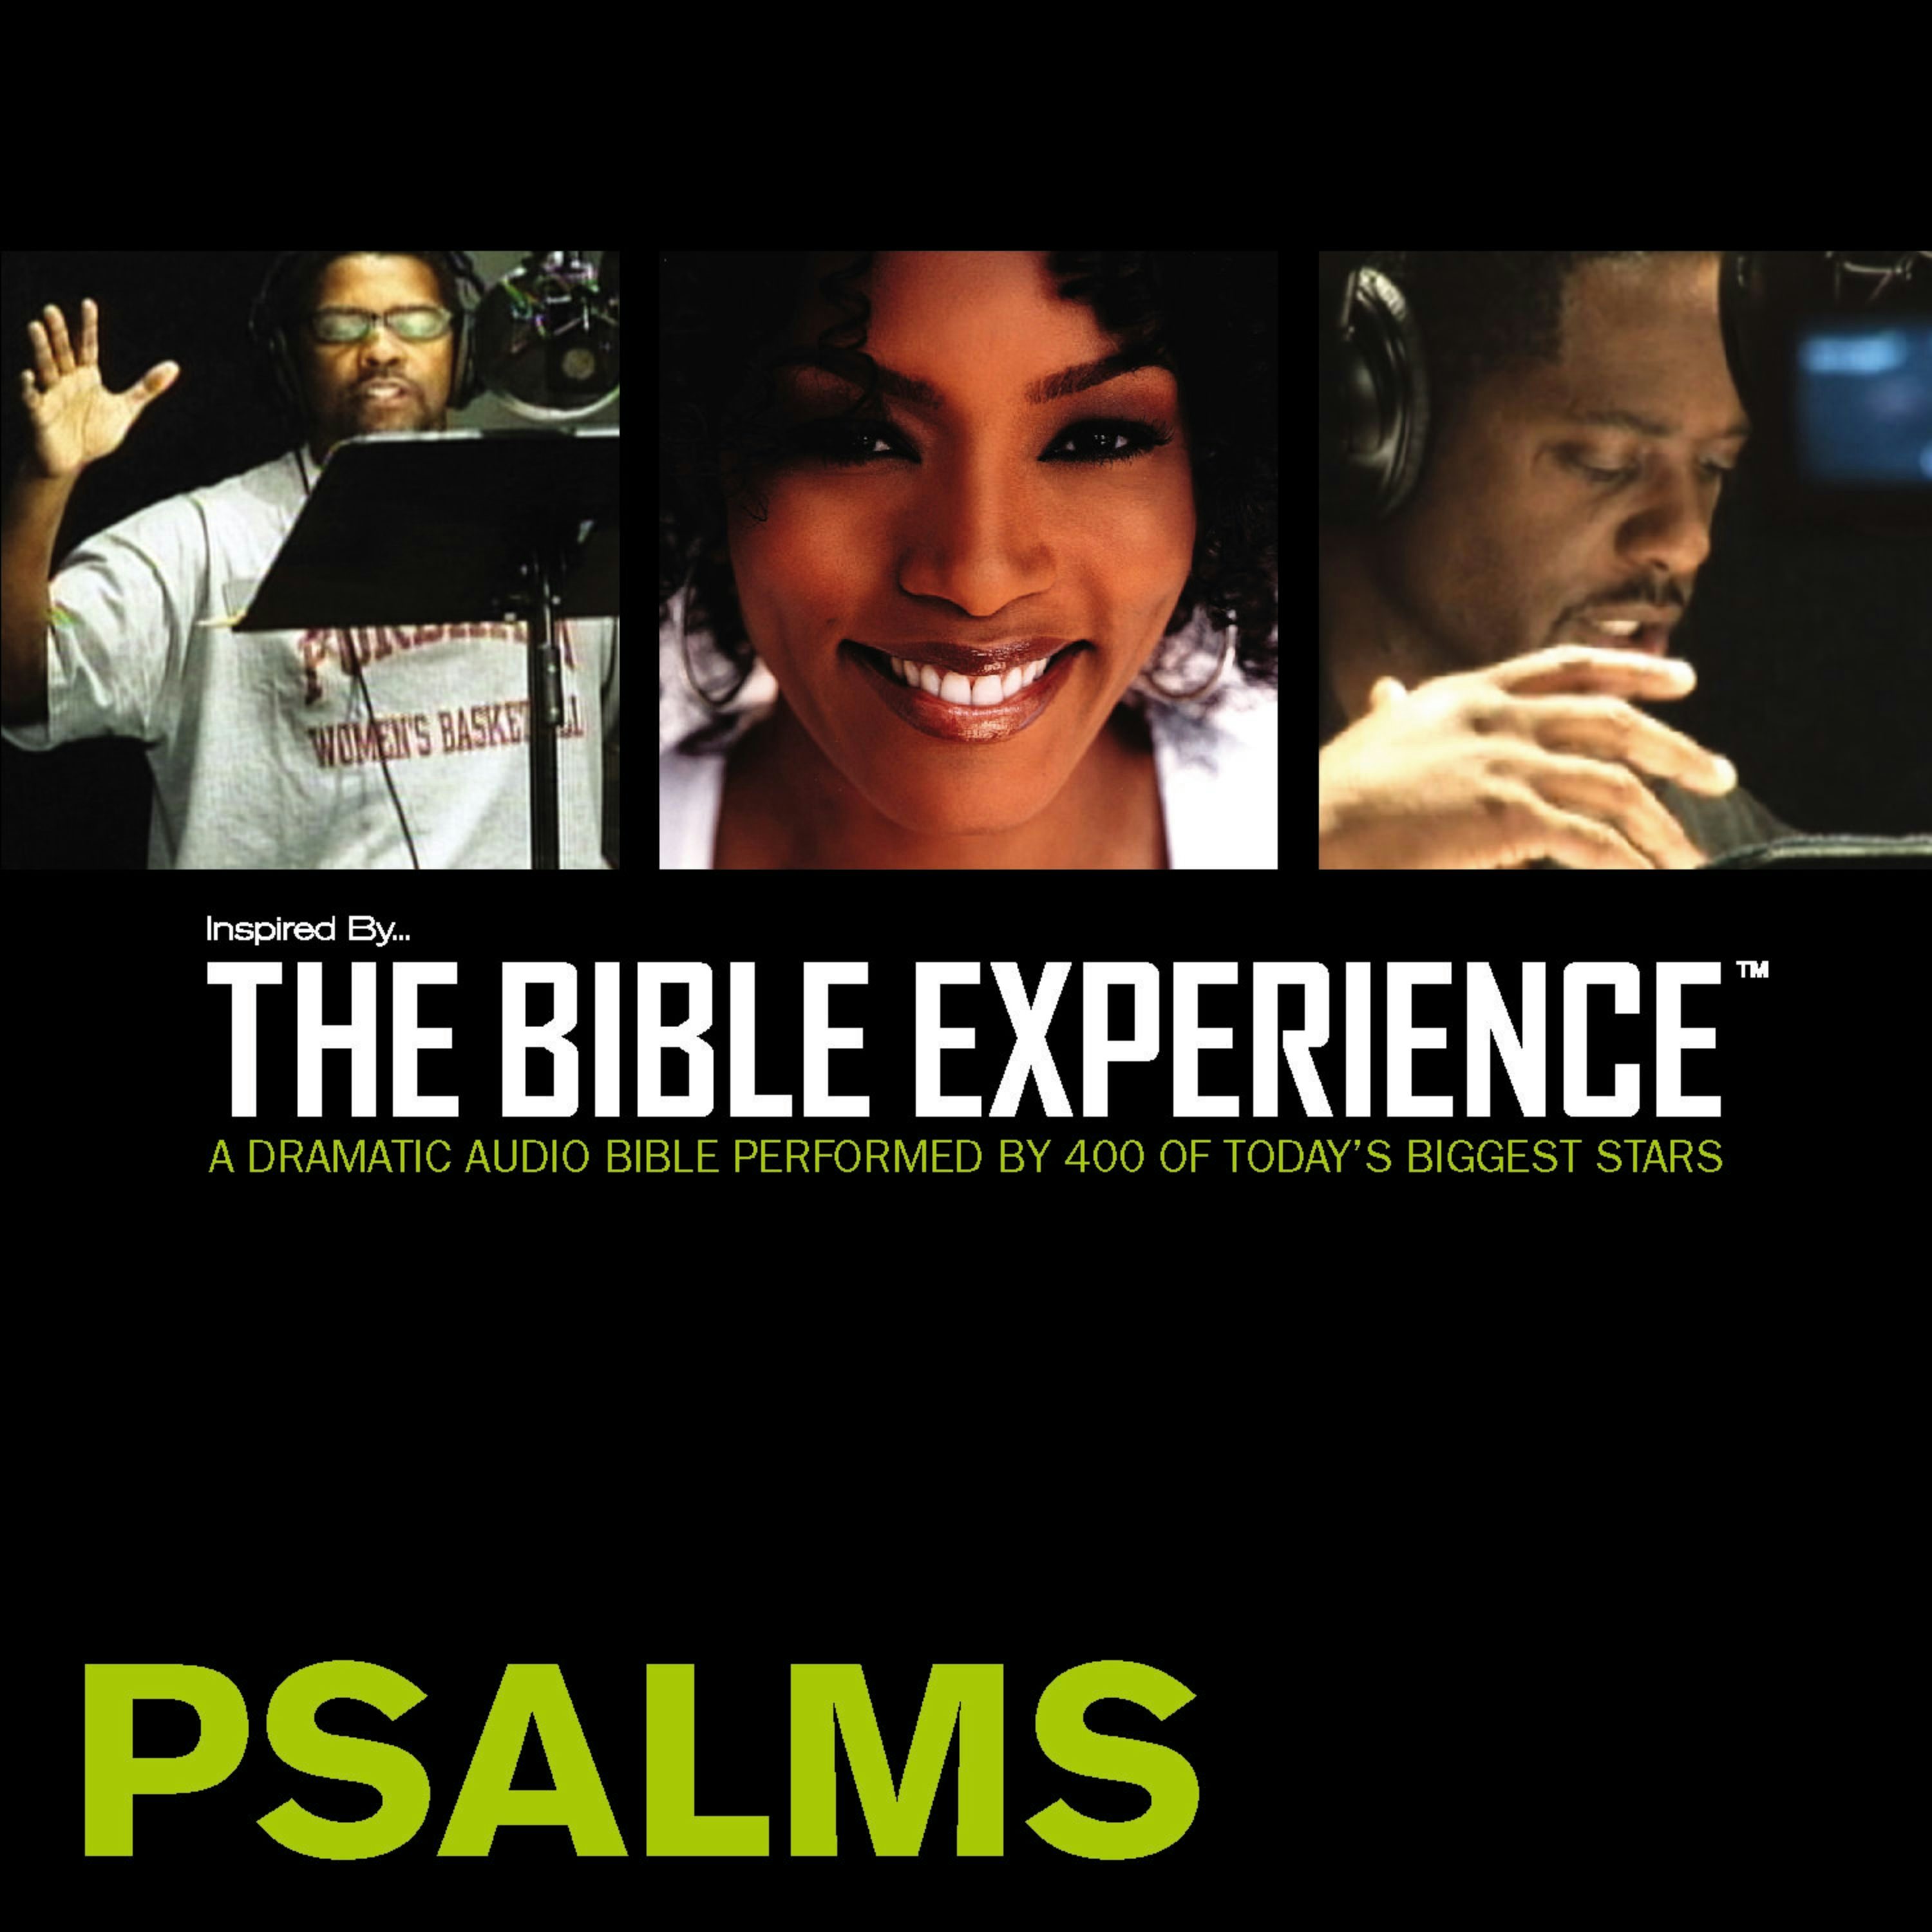 the bible experience complete torrent